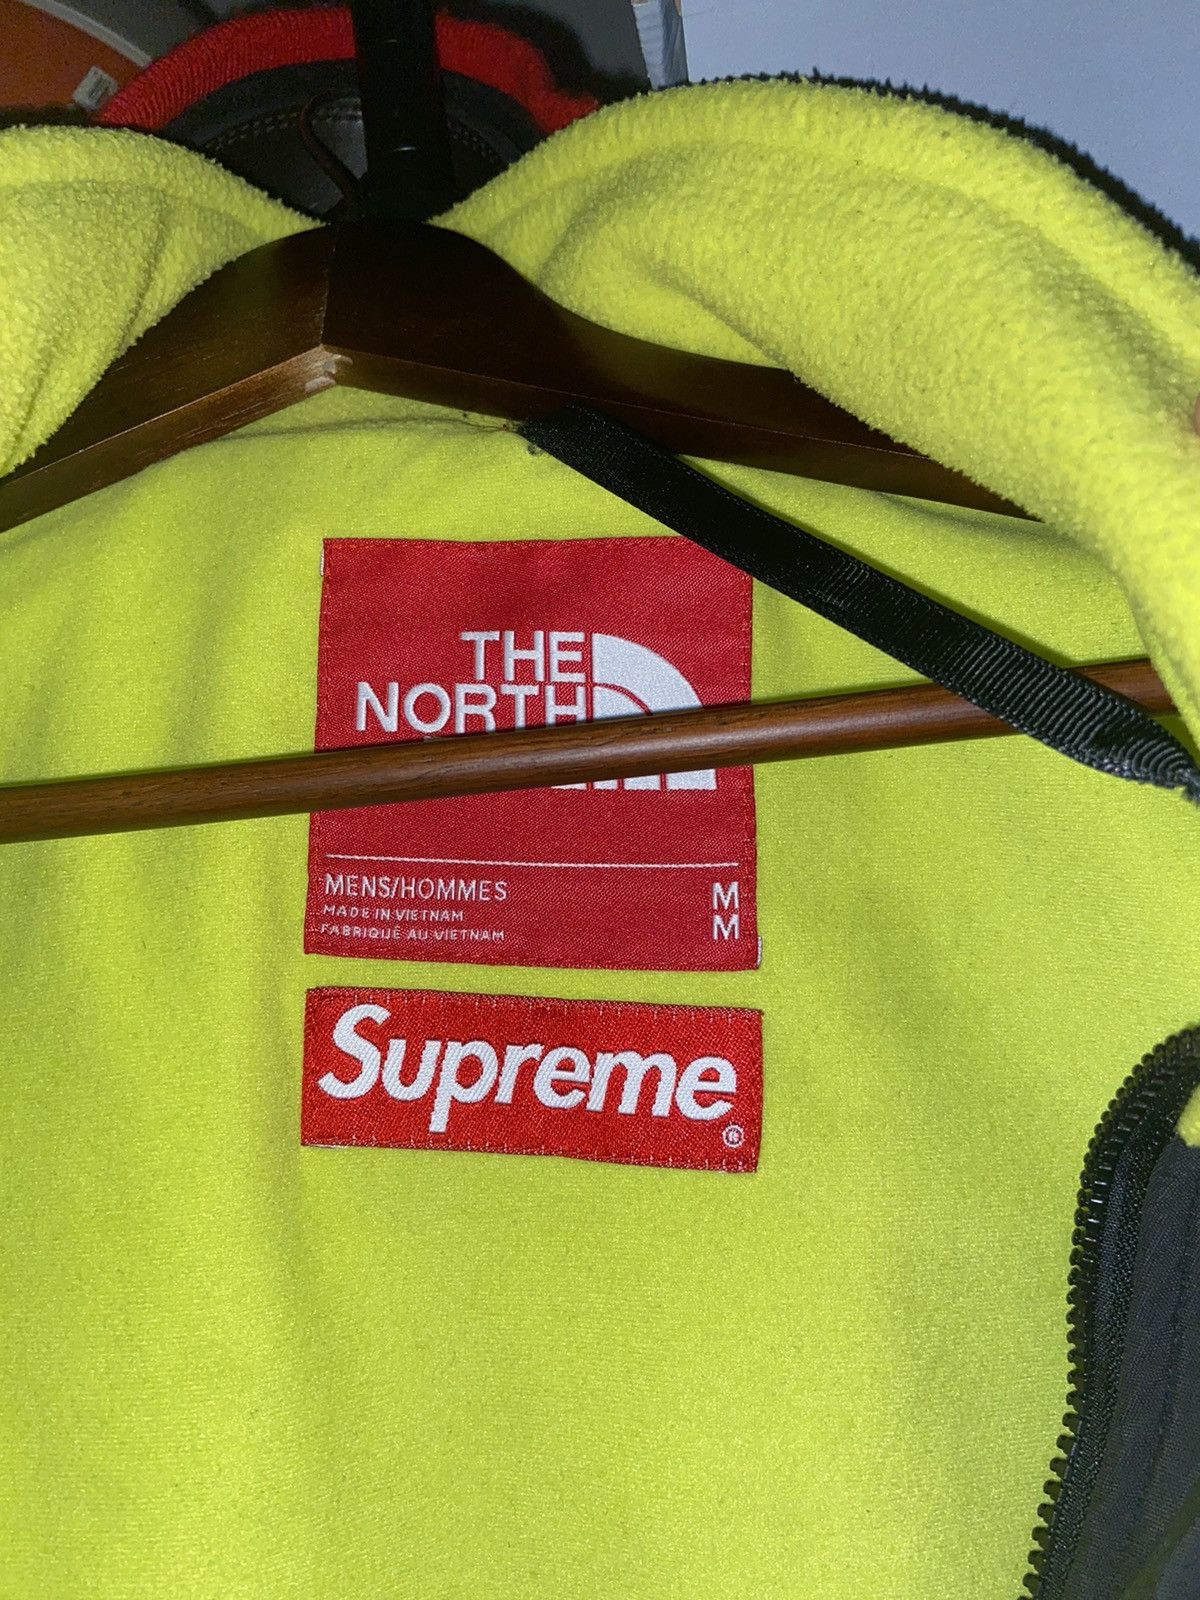 Supreme Supreme The North Face Expedition Fleece Size M (FW18) | Grailed